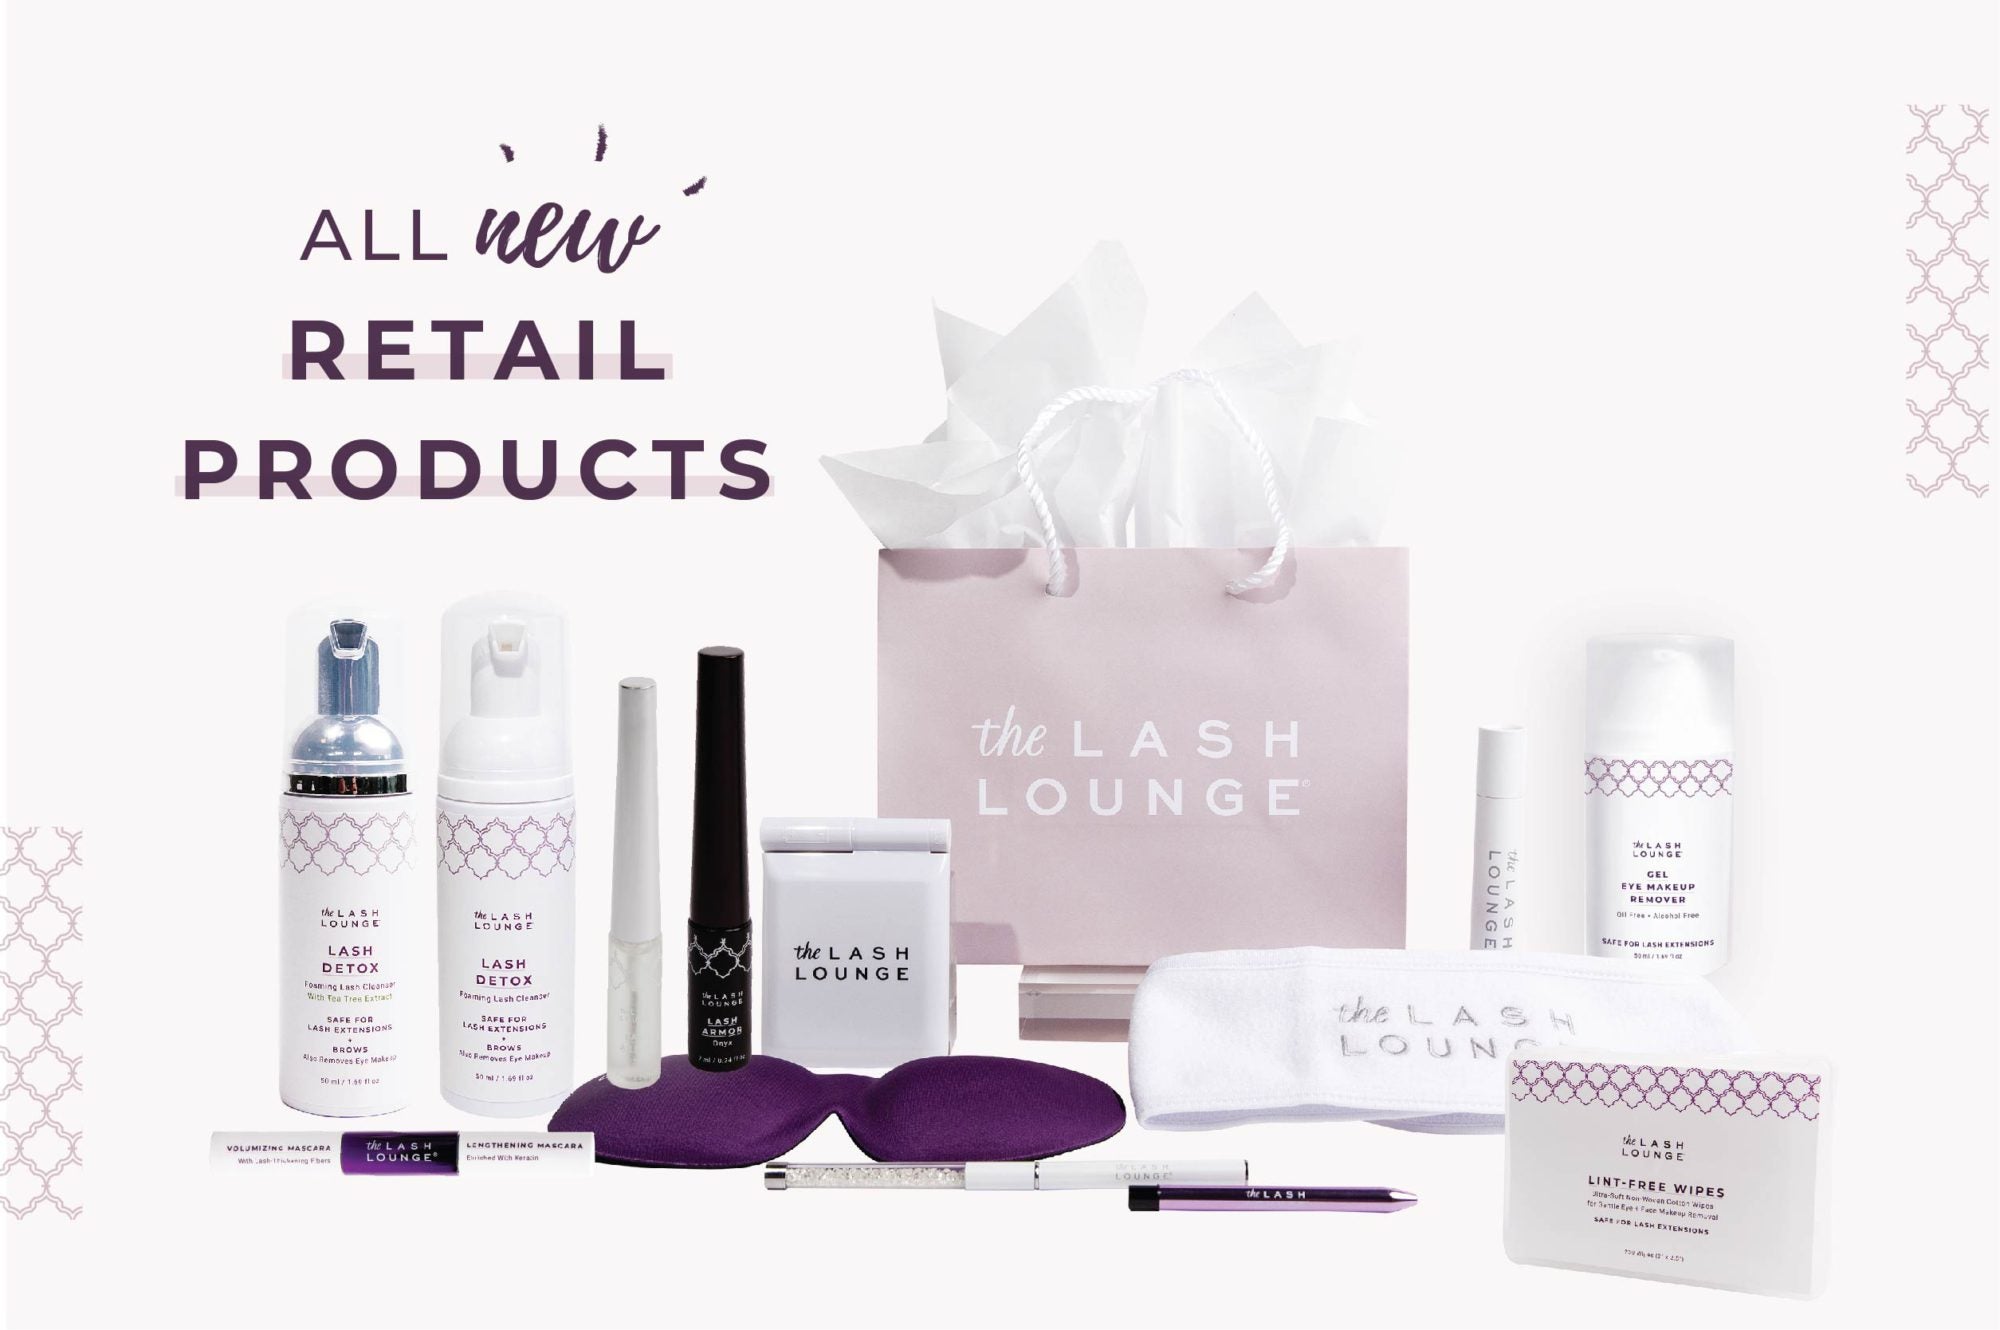 Retail products and accessories from The Lash Lounge featuring lash care, skincare, cosmetics and accessories